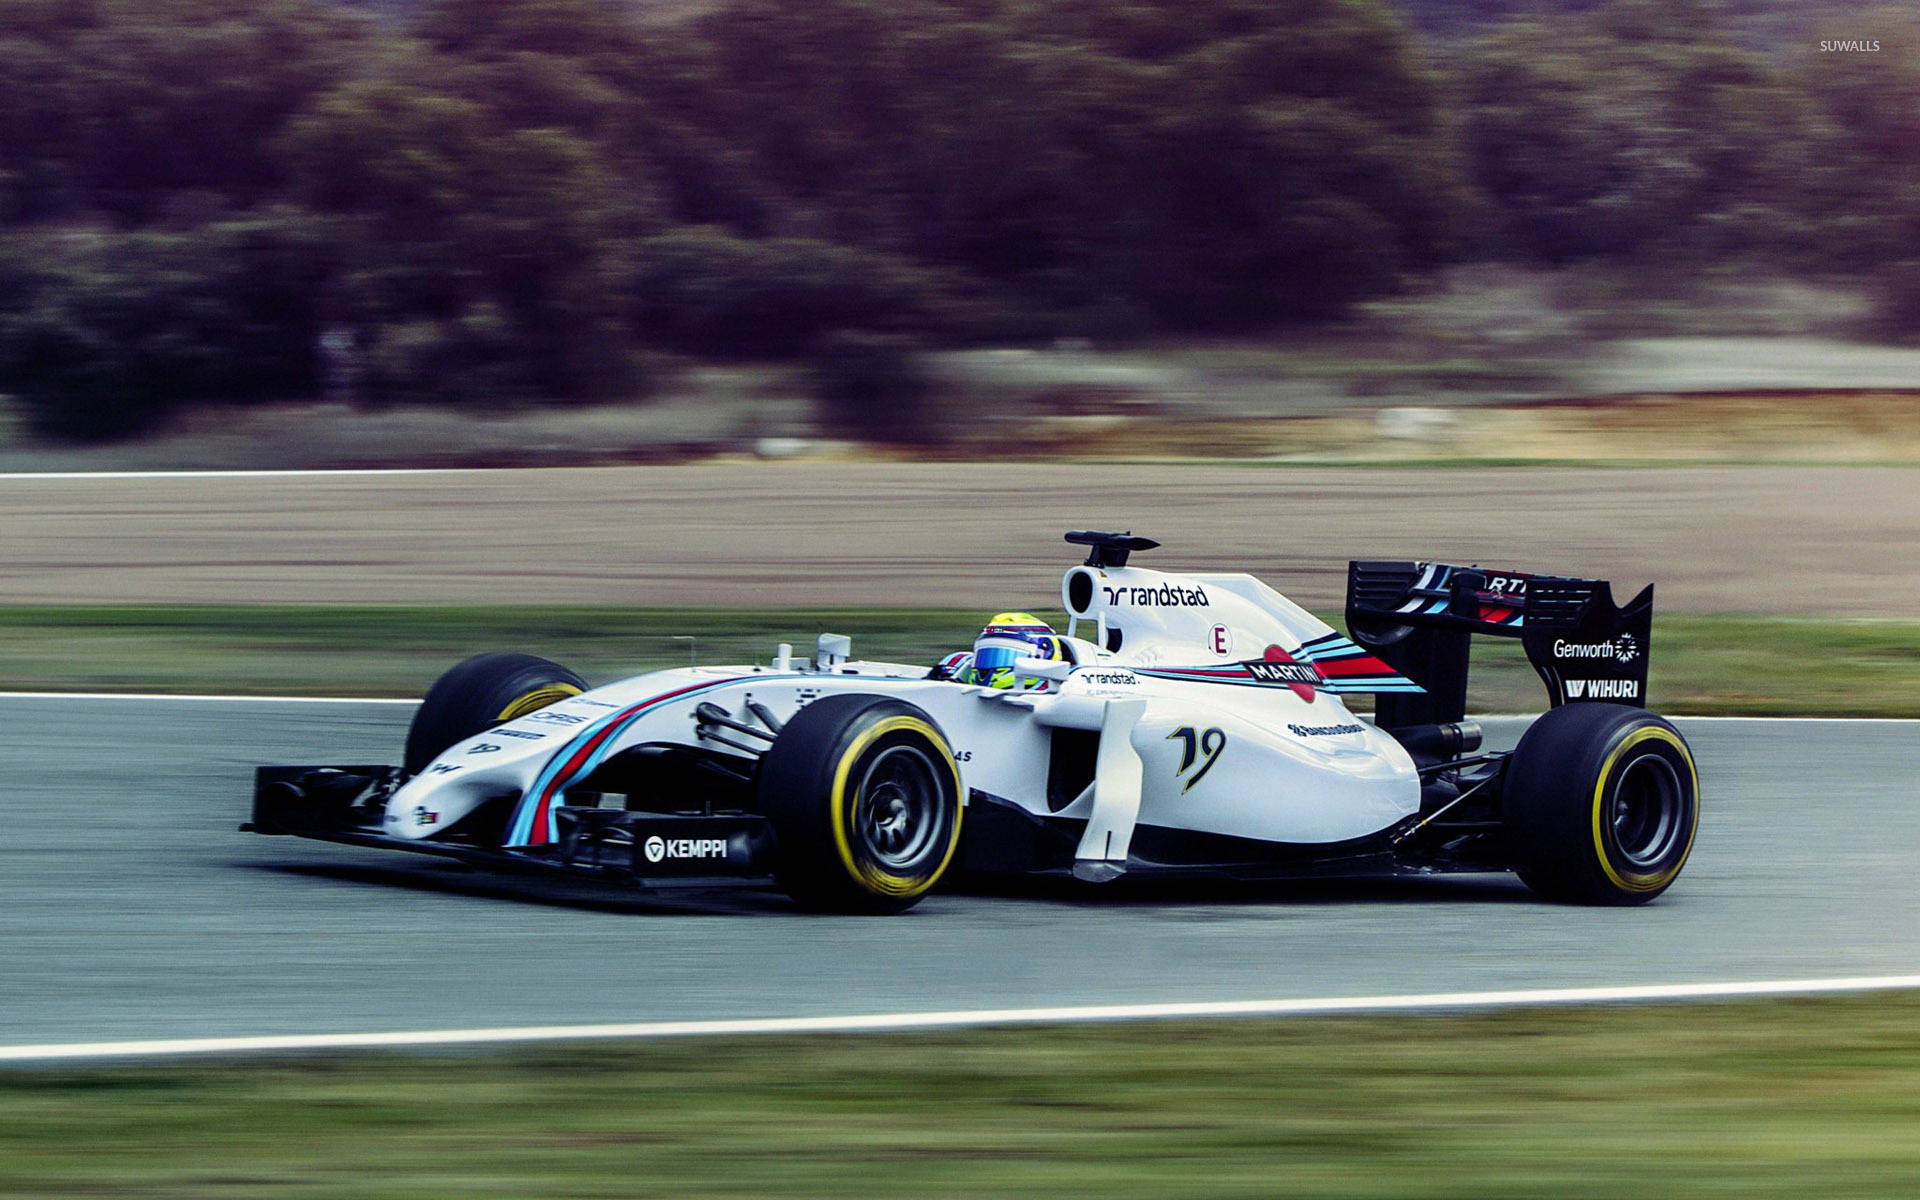 Williams Sports Car In Action Wallpaper